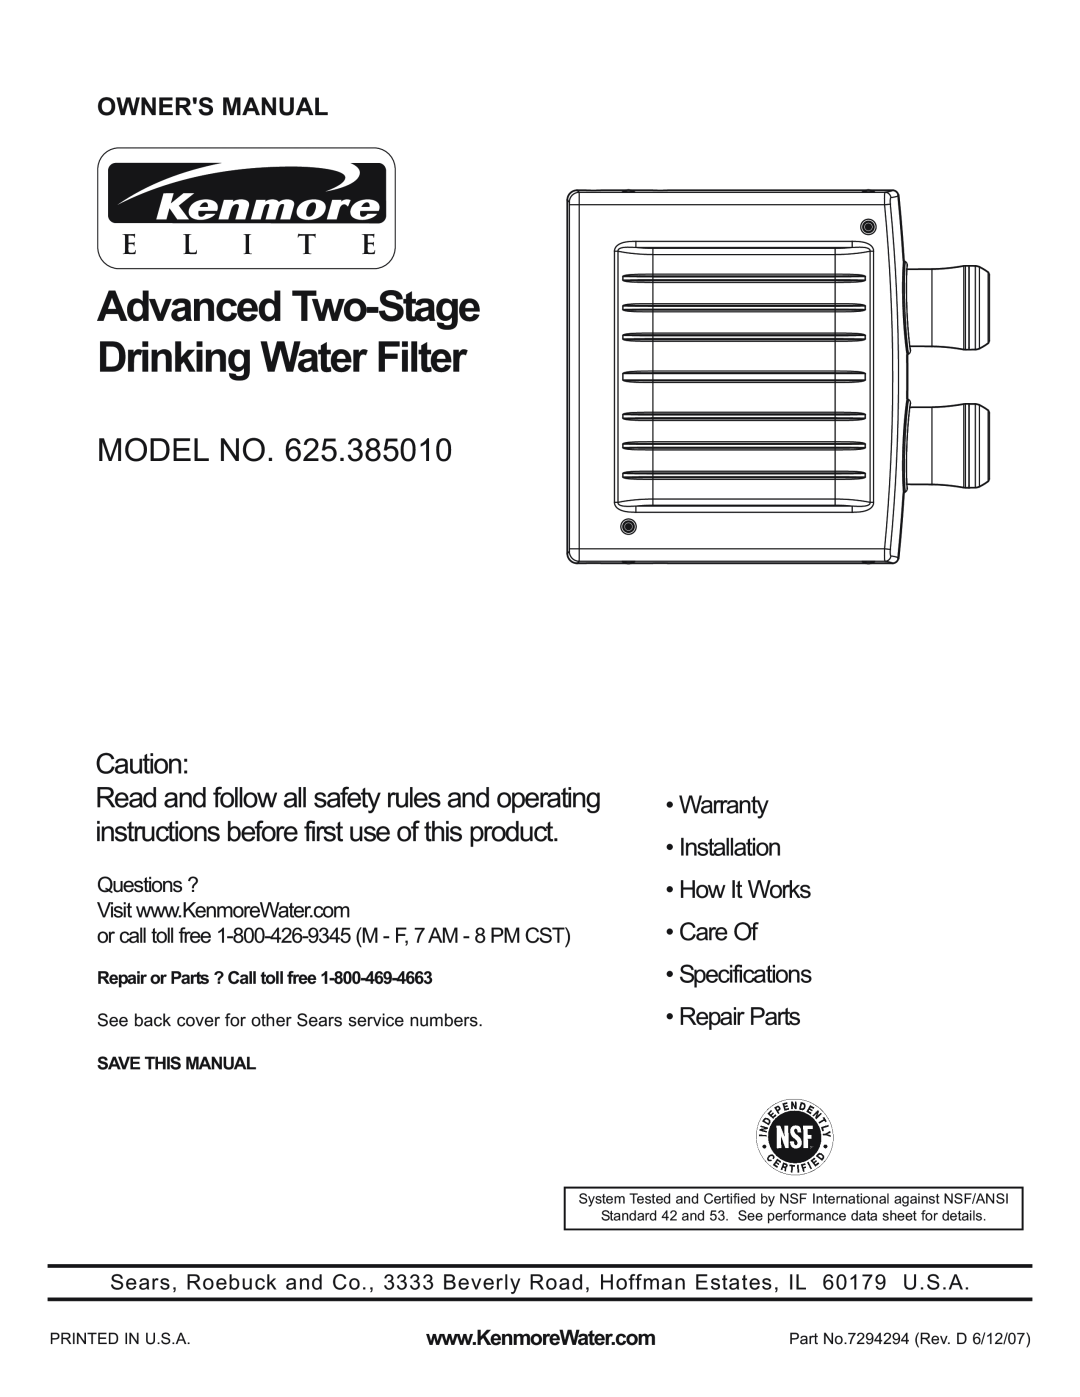 Kenmore 625.38501 manual E L I T E, Advanced Two-StageDrinking Water Filter, Model No 